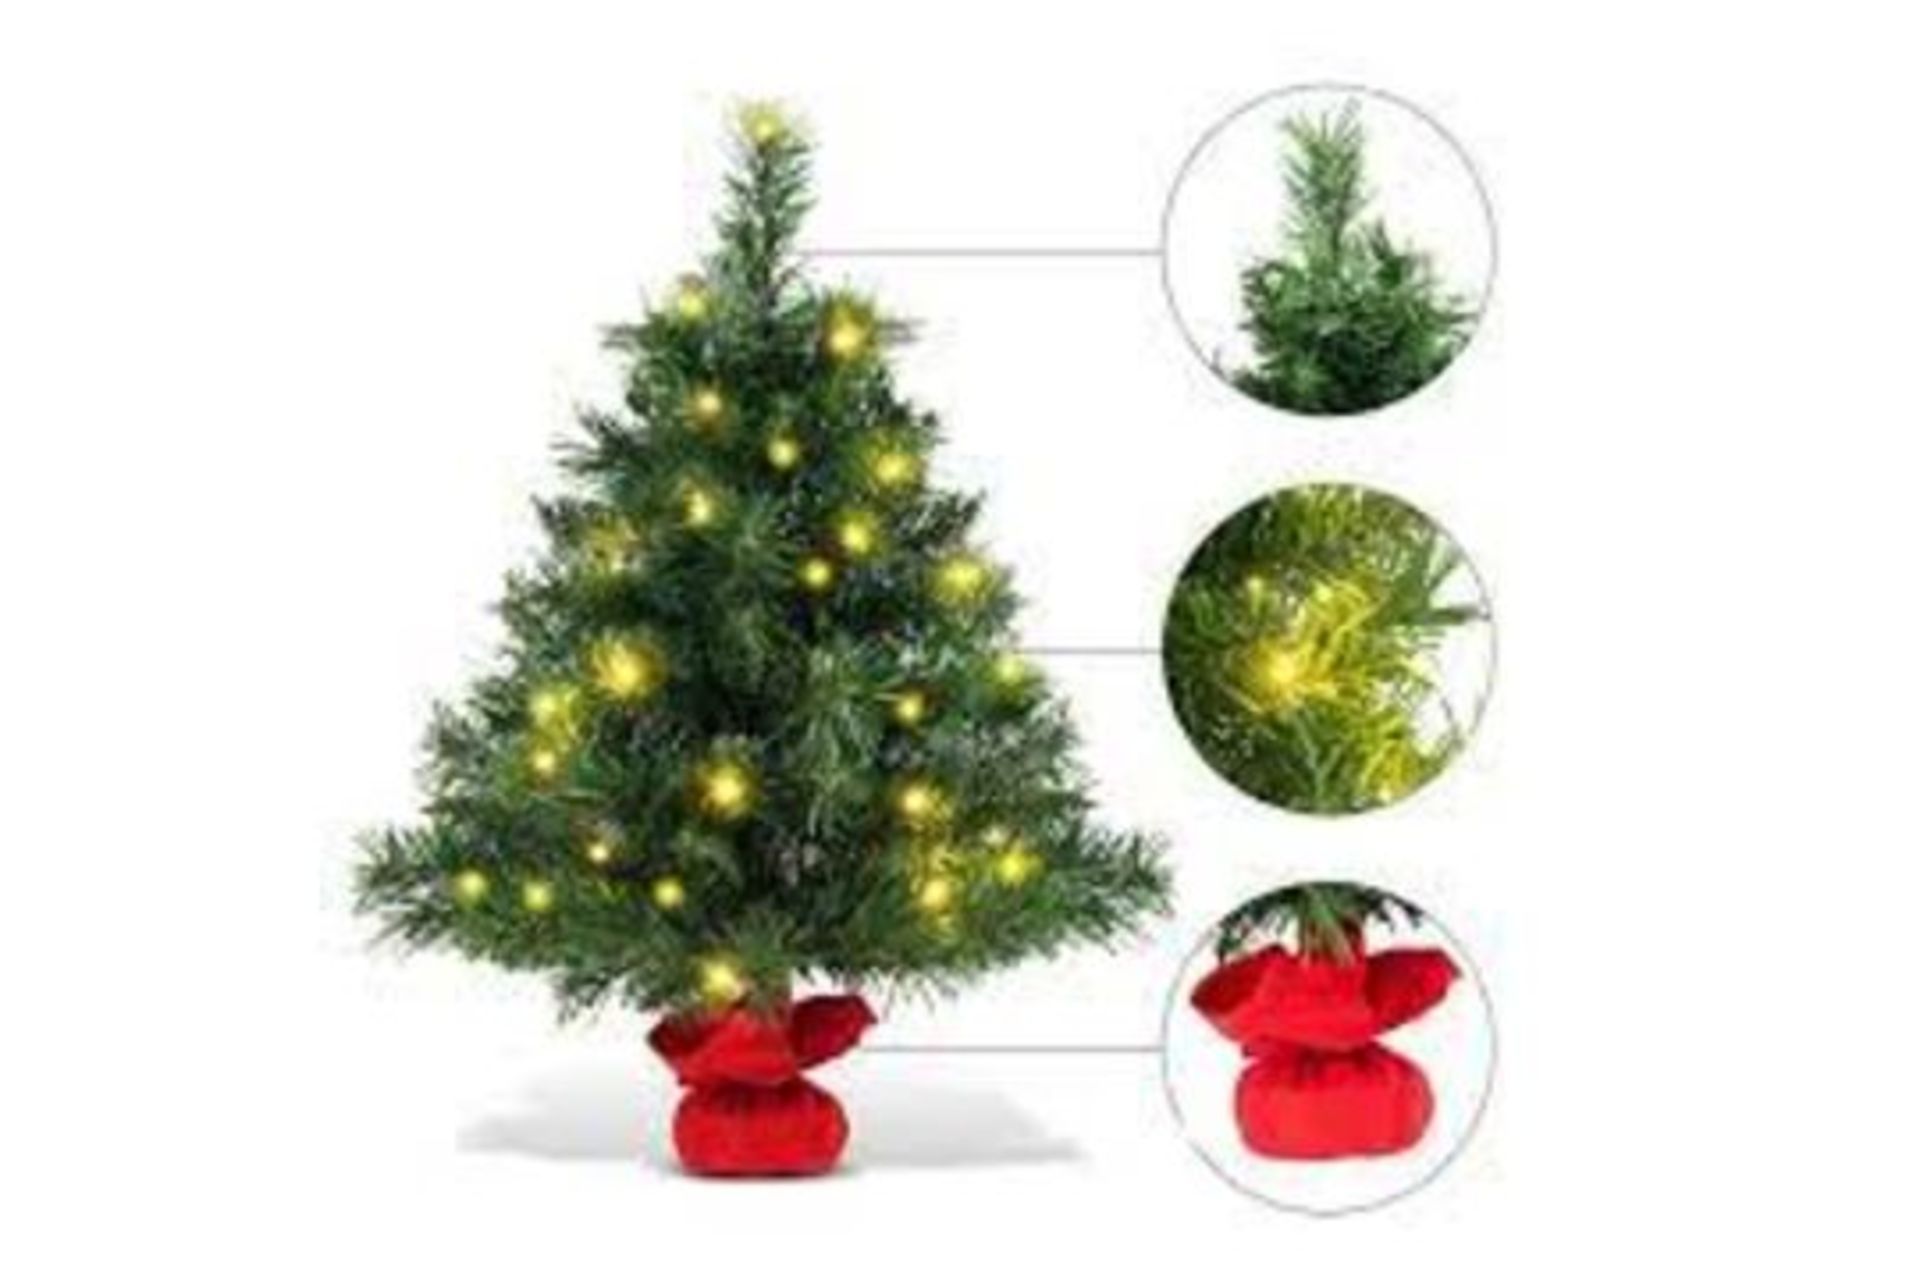 4 x 24-in Pre-Lit Tabletop Fir Artifical Christmas Tree Battery Operated with Led Lights . - R13.